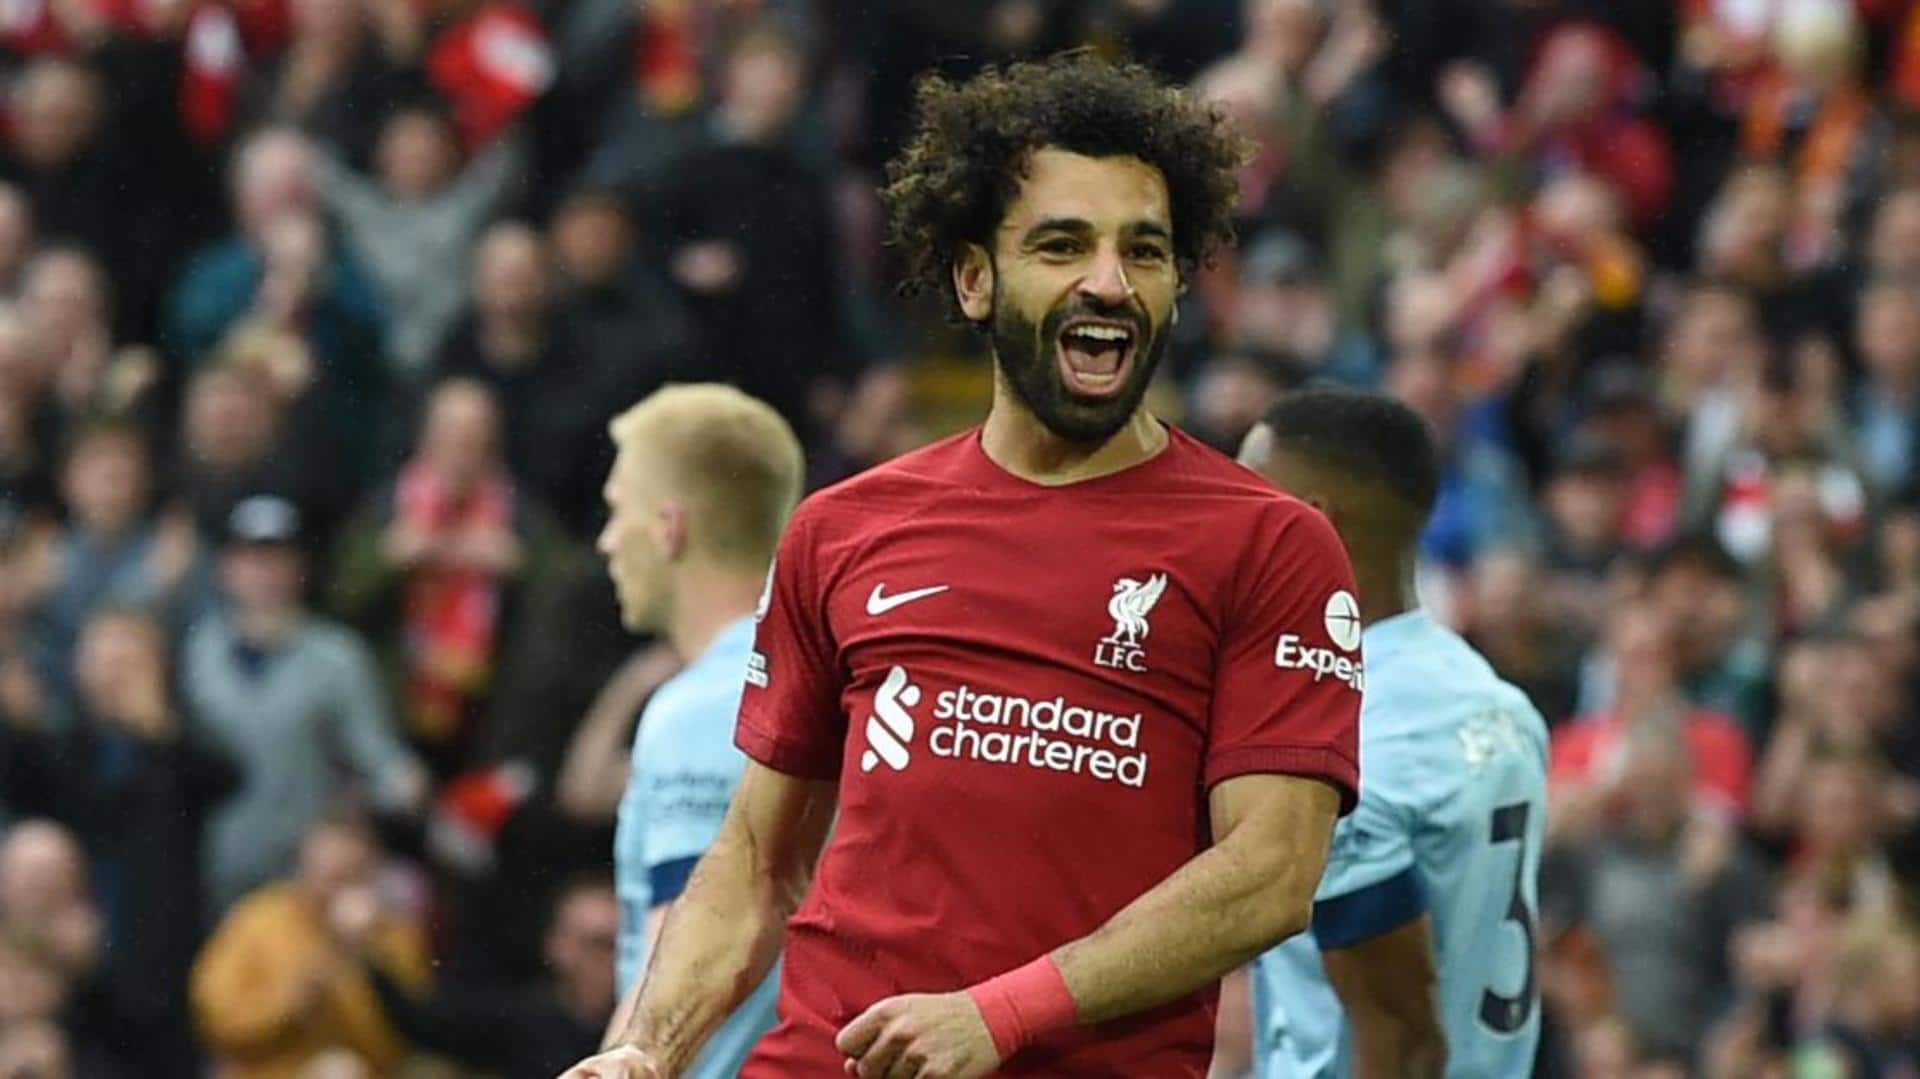 Mohamed Salah scores his 100th goal for Liverpool at Anfield